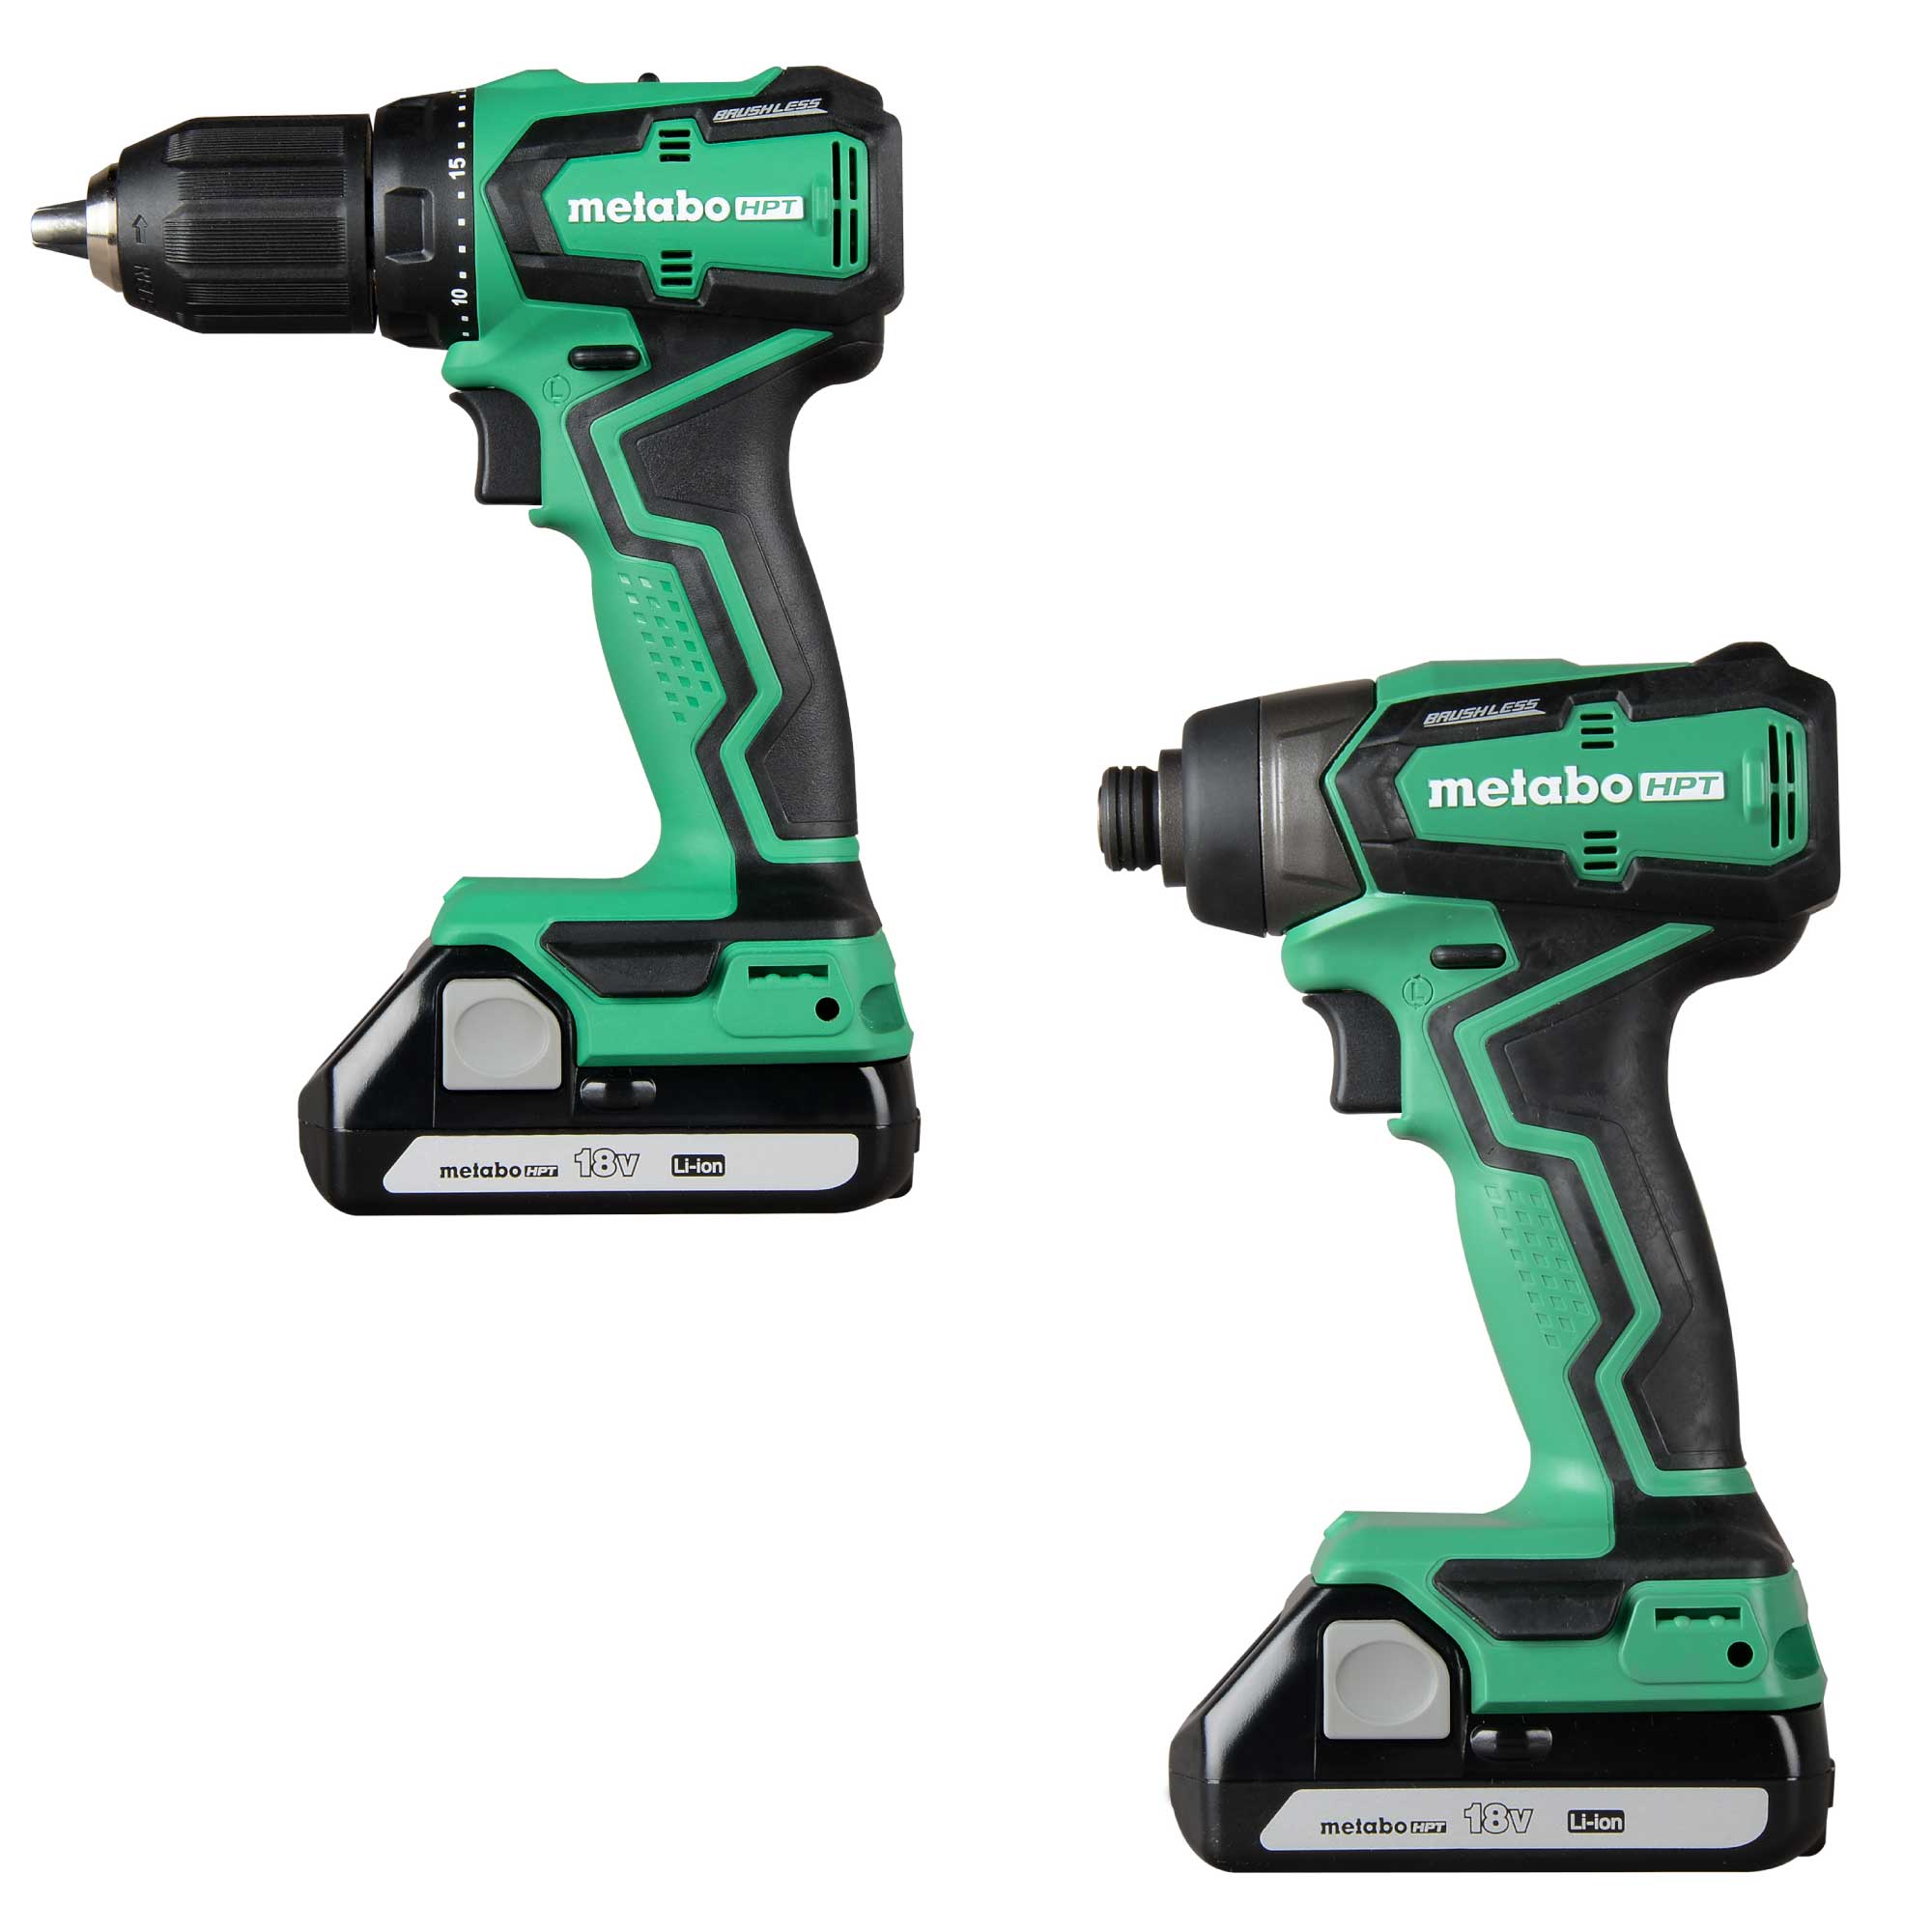 Metabo HPT MultiVolt 18-volt 1/2-in Keyless Brushless Cordless Drill (2-batteries included and Charger included) with MultiVolt 18-volt 1/4-in